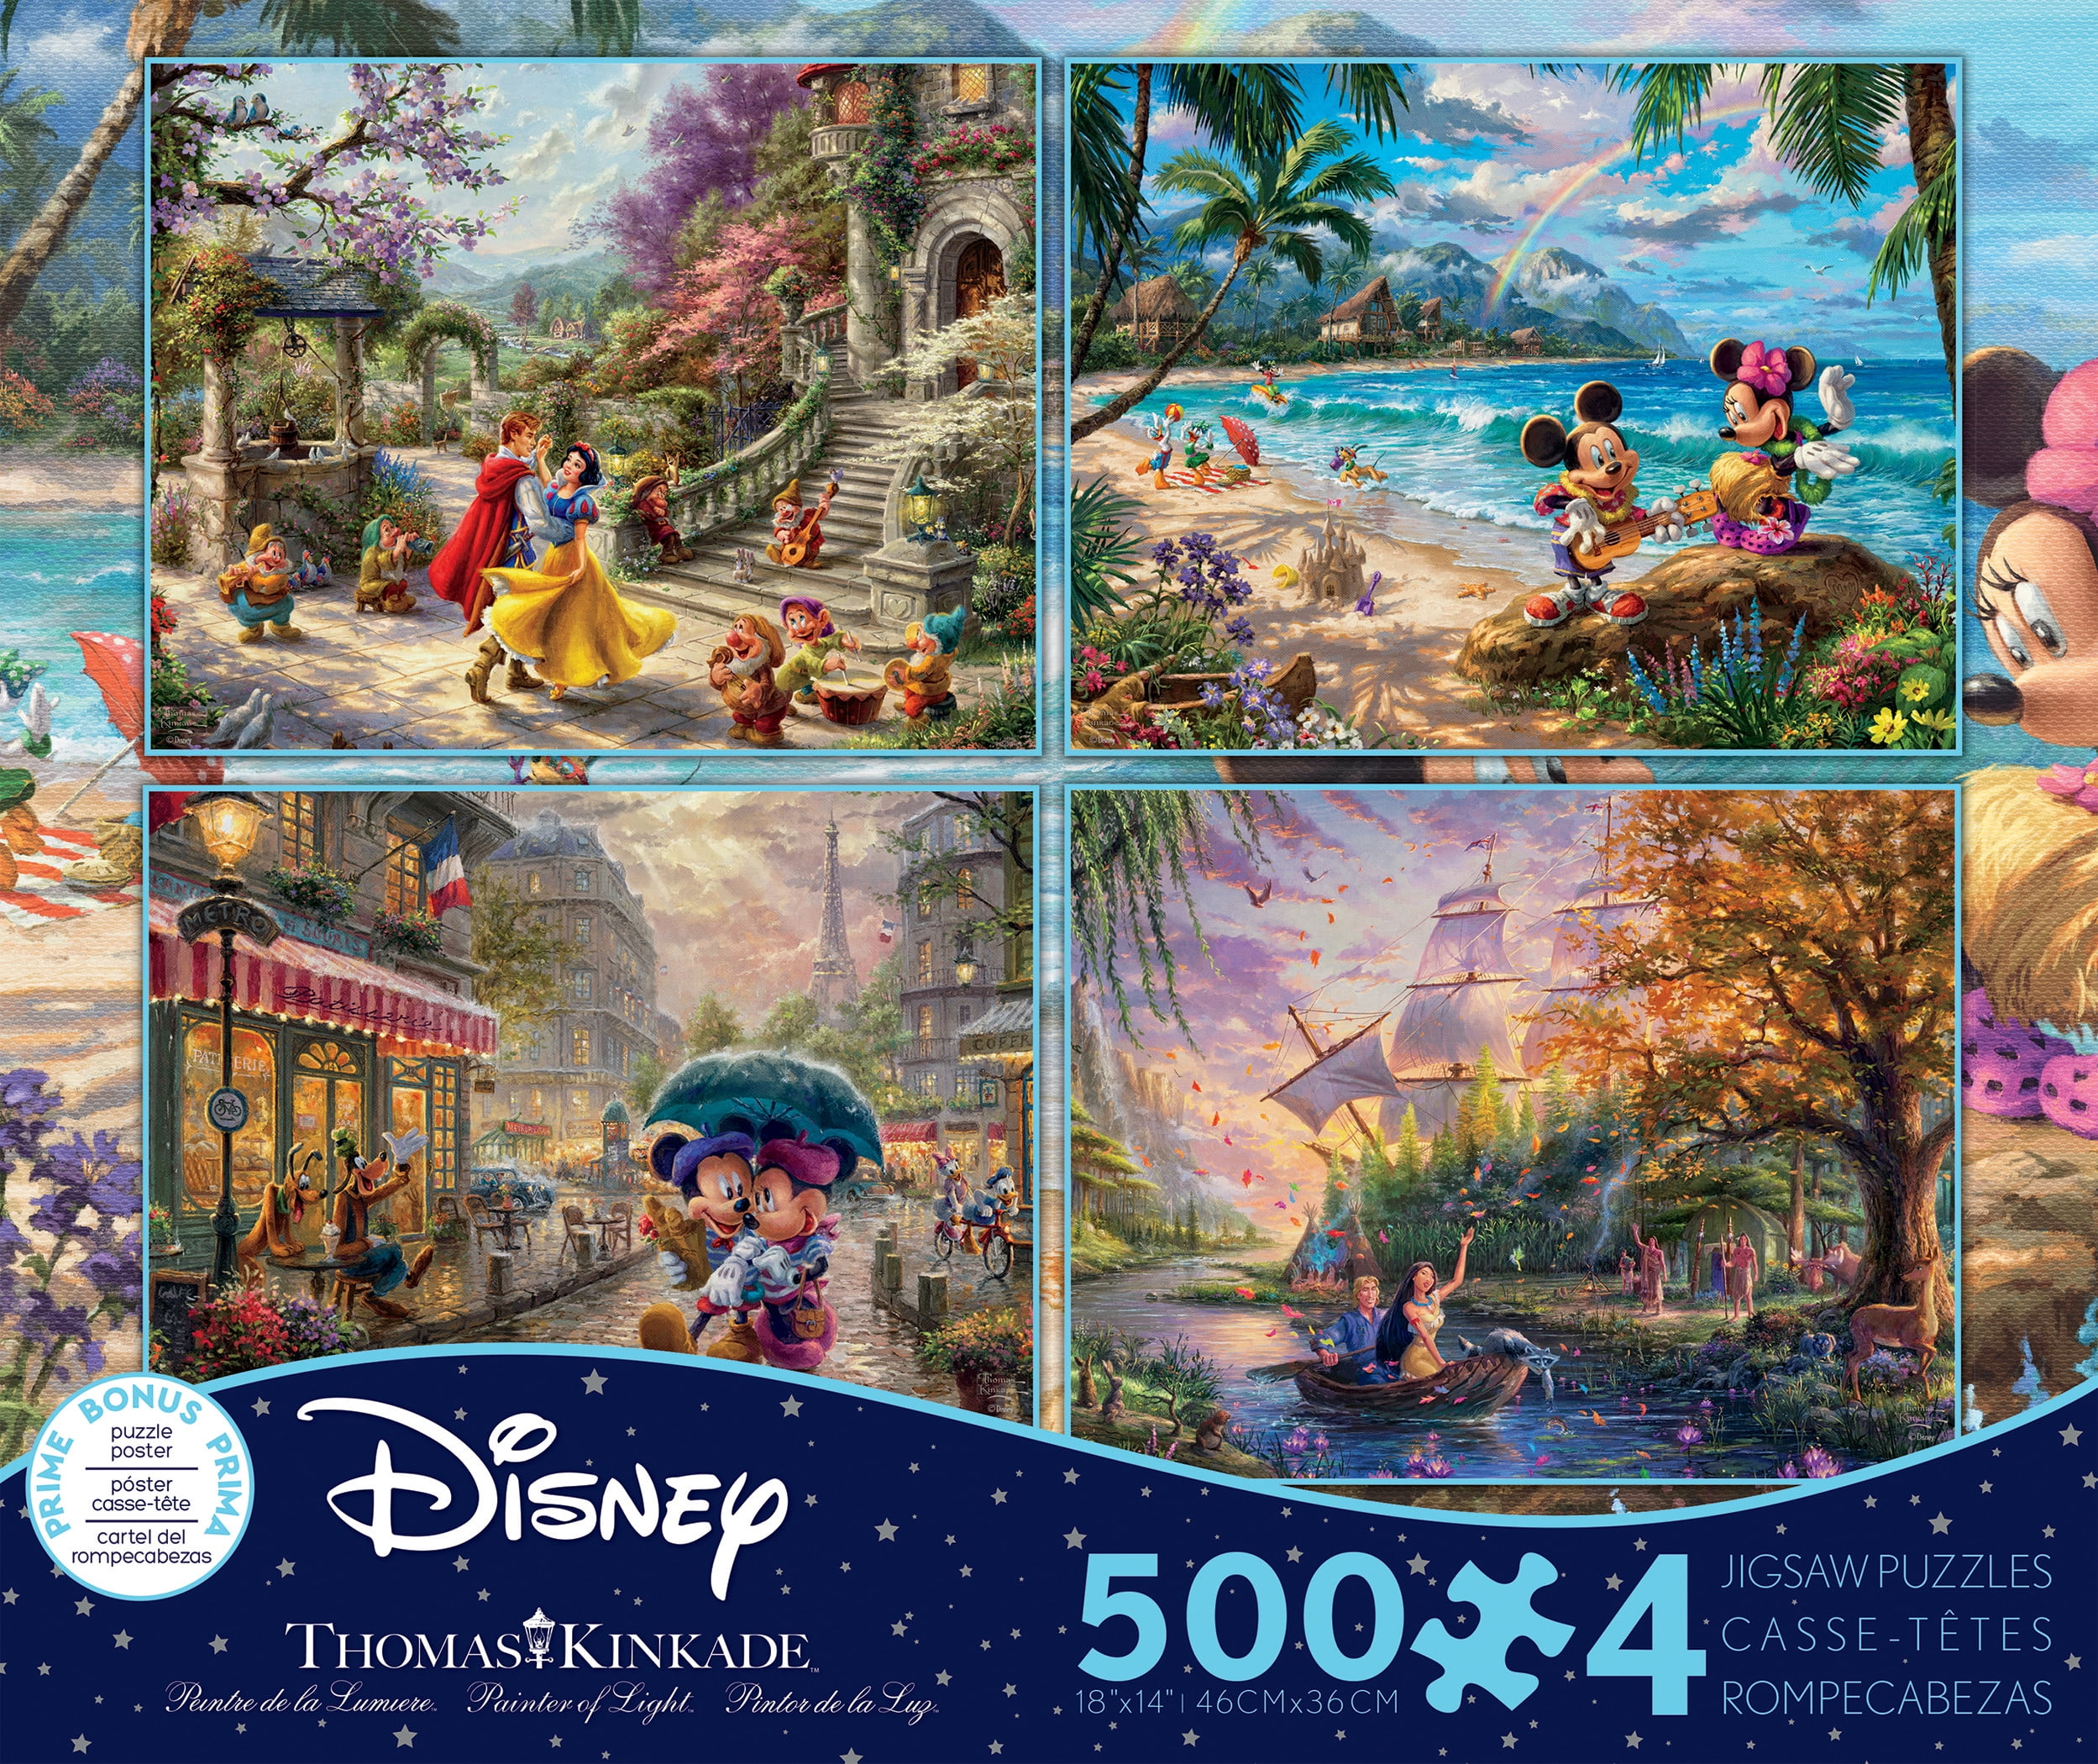 Ceaco 3663-01 4-1 Multi-Pack Thomas Kinkade Disney Jigsaw Puzzle 500 Pieces for sale online 